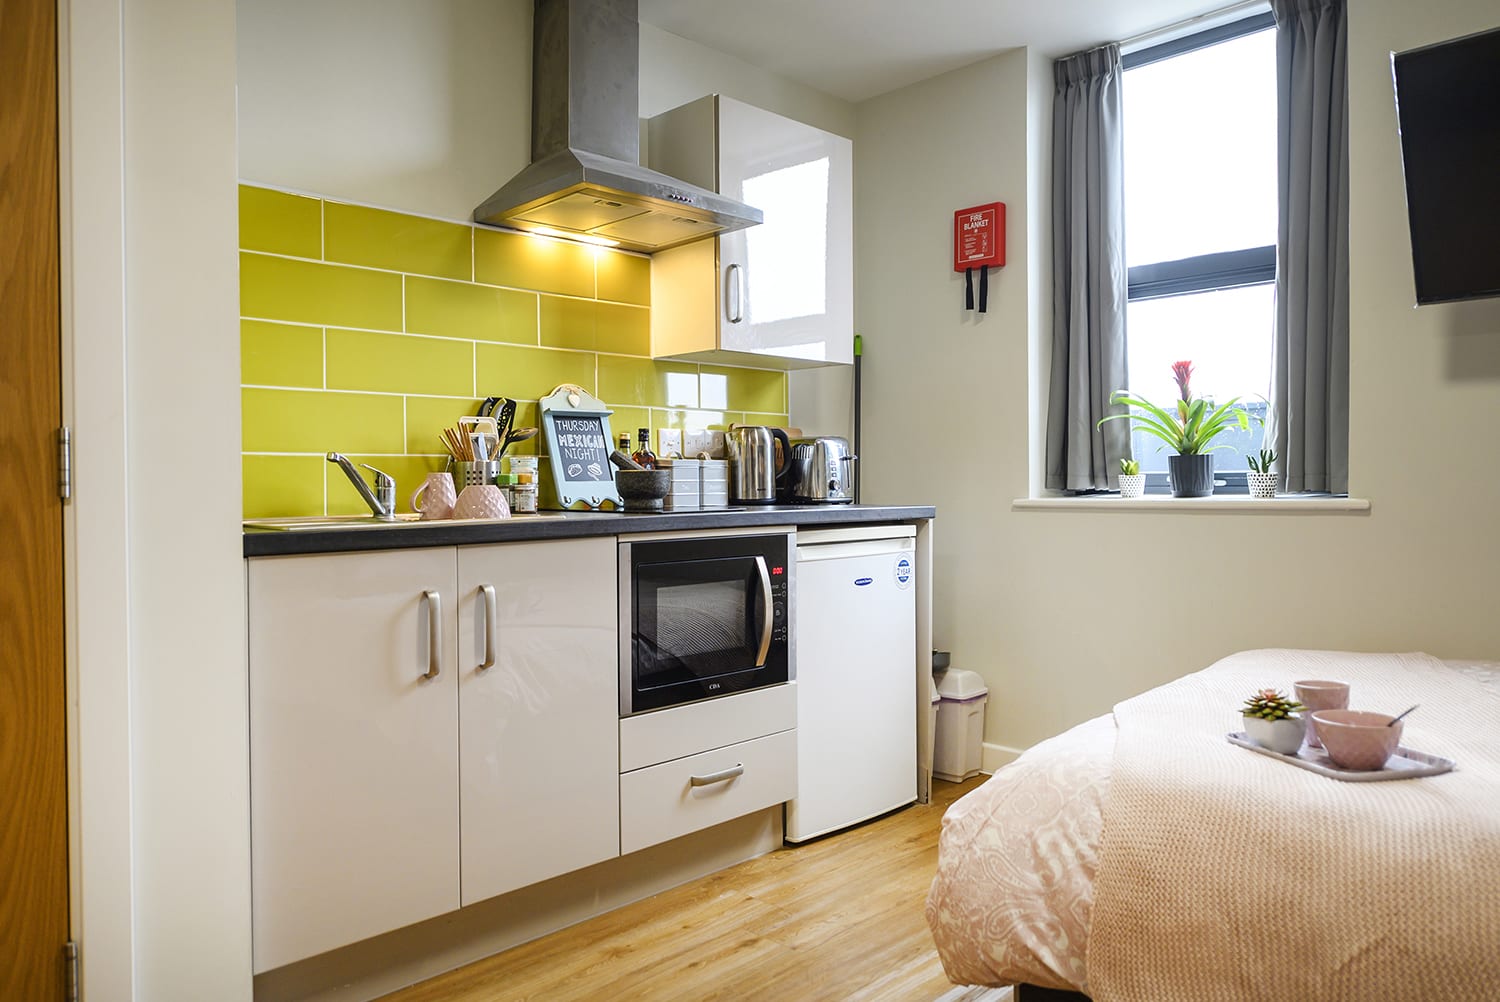 small studio kitchen at the end of student's double bed